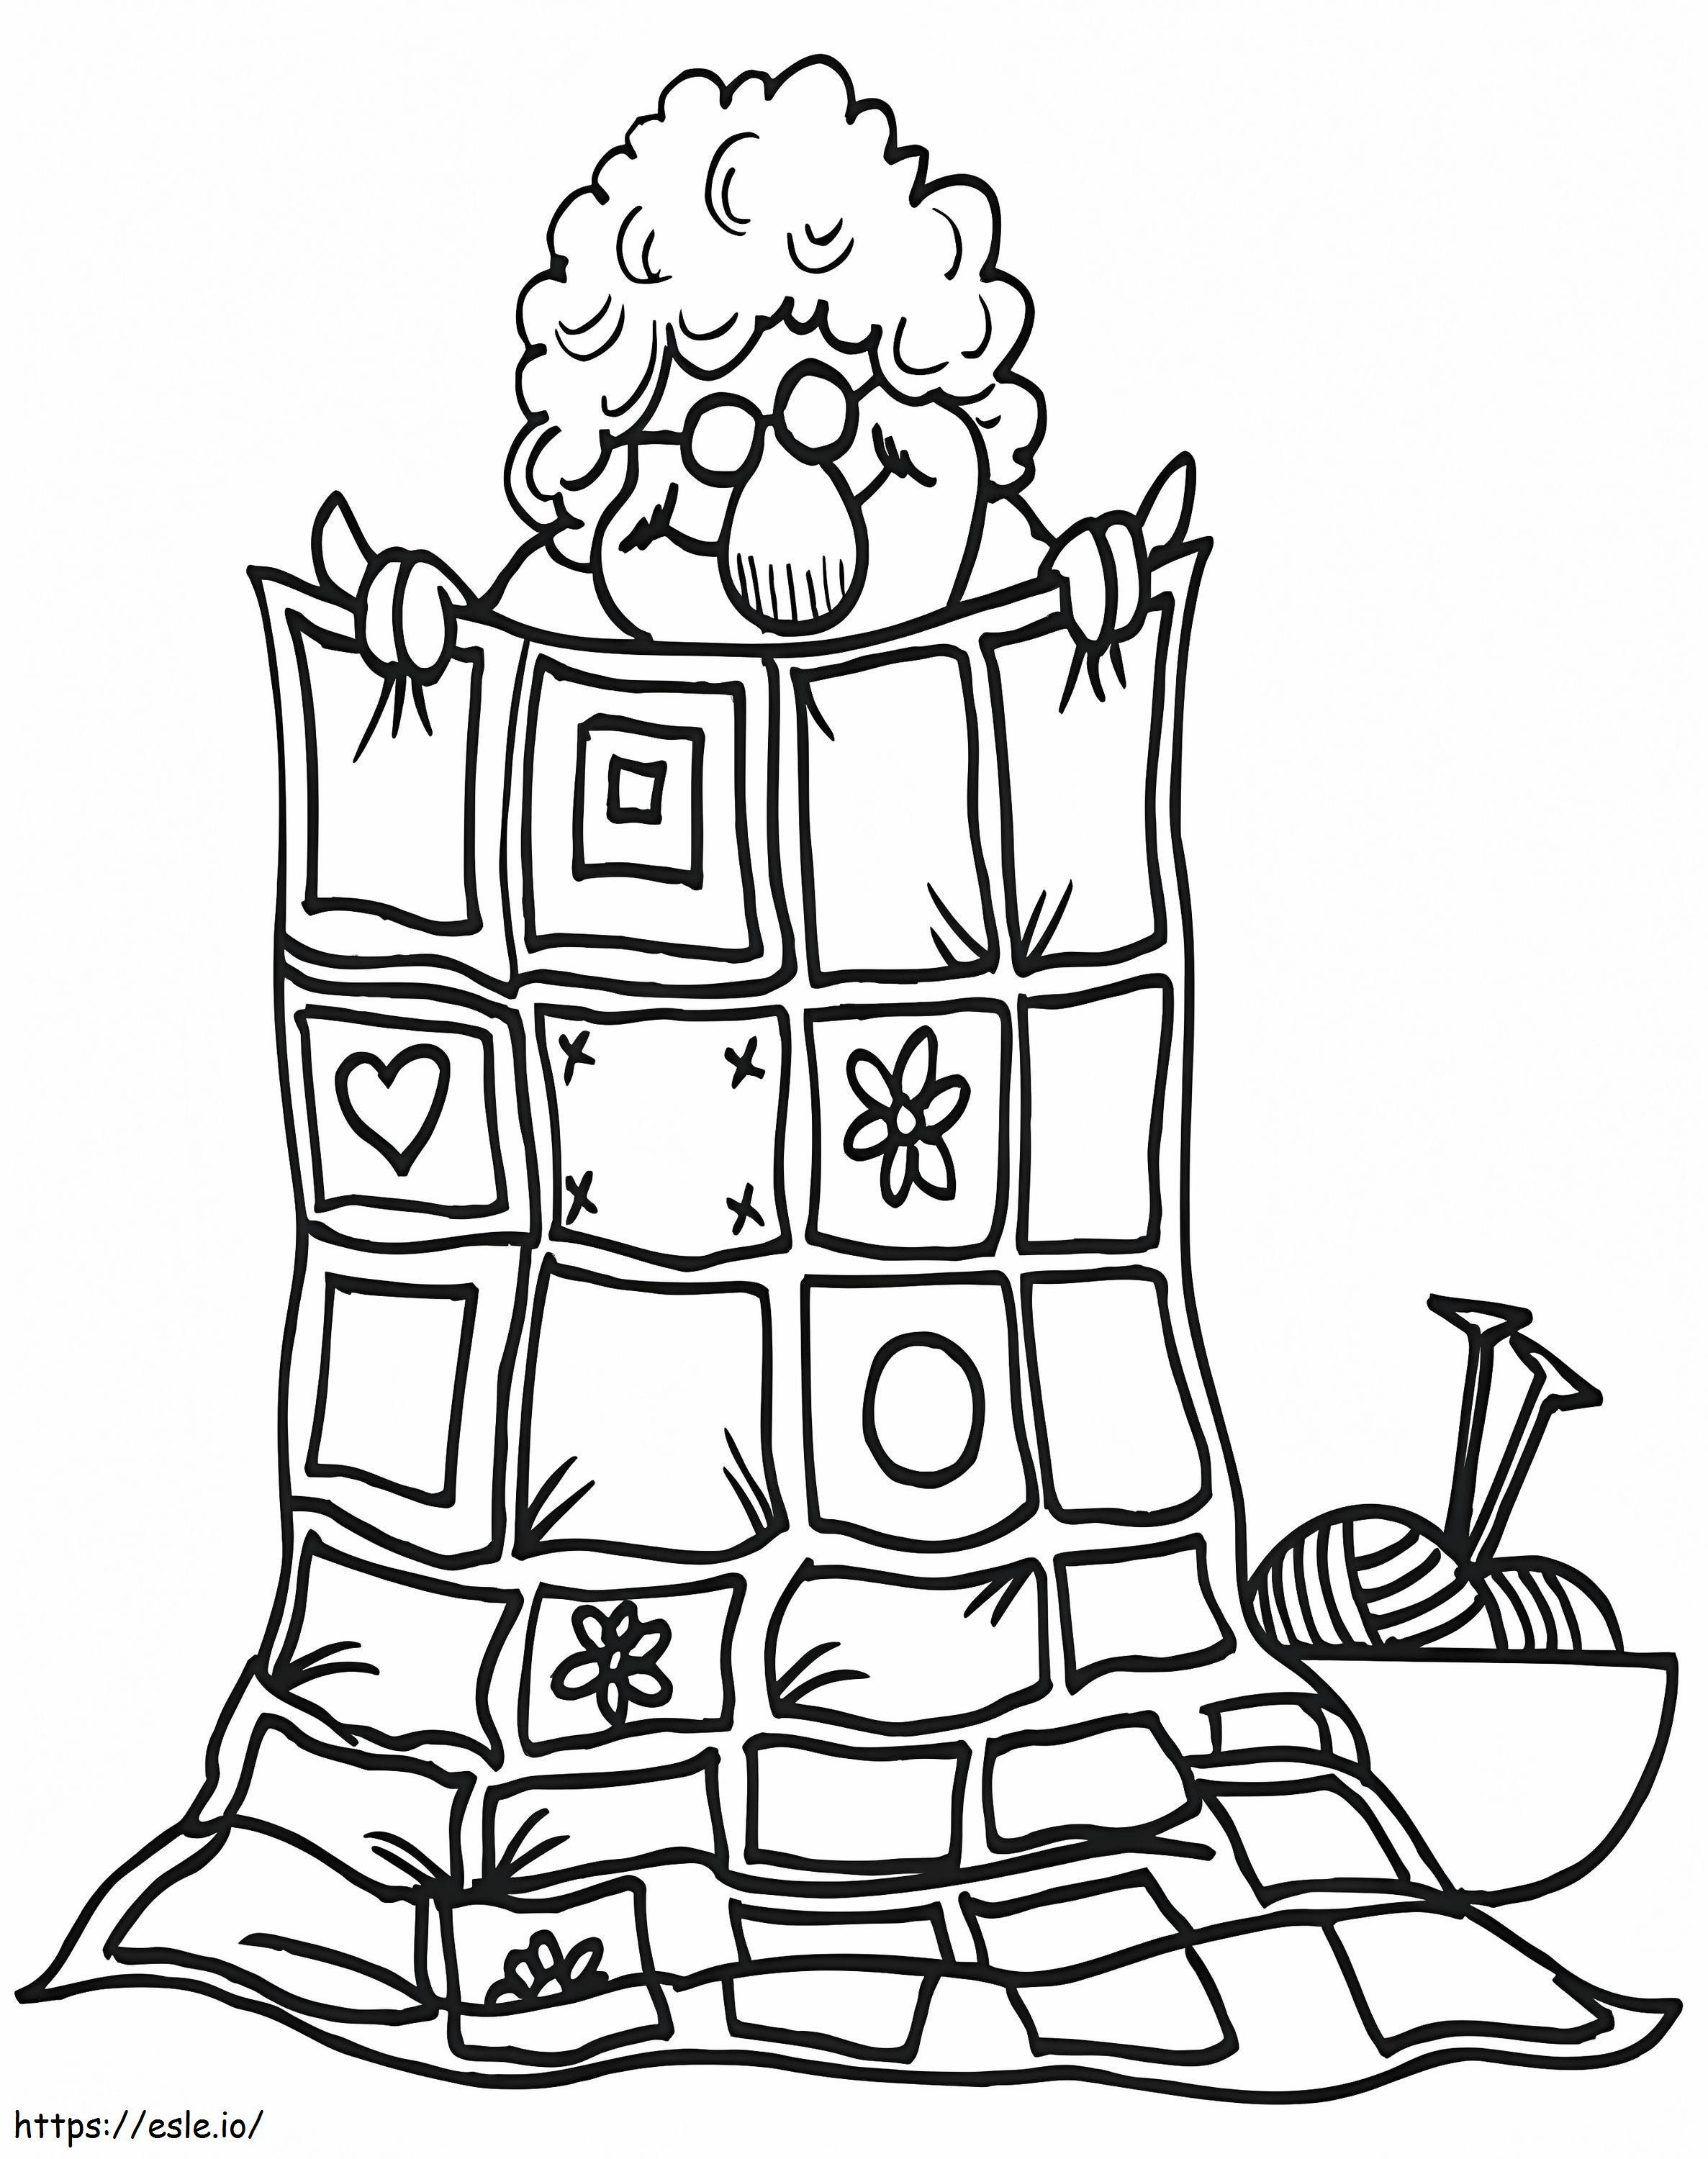 Quilt 3 coloring page